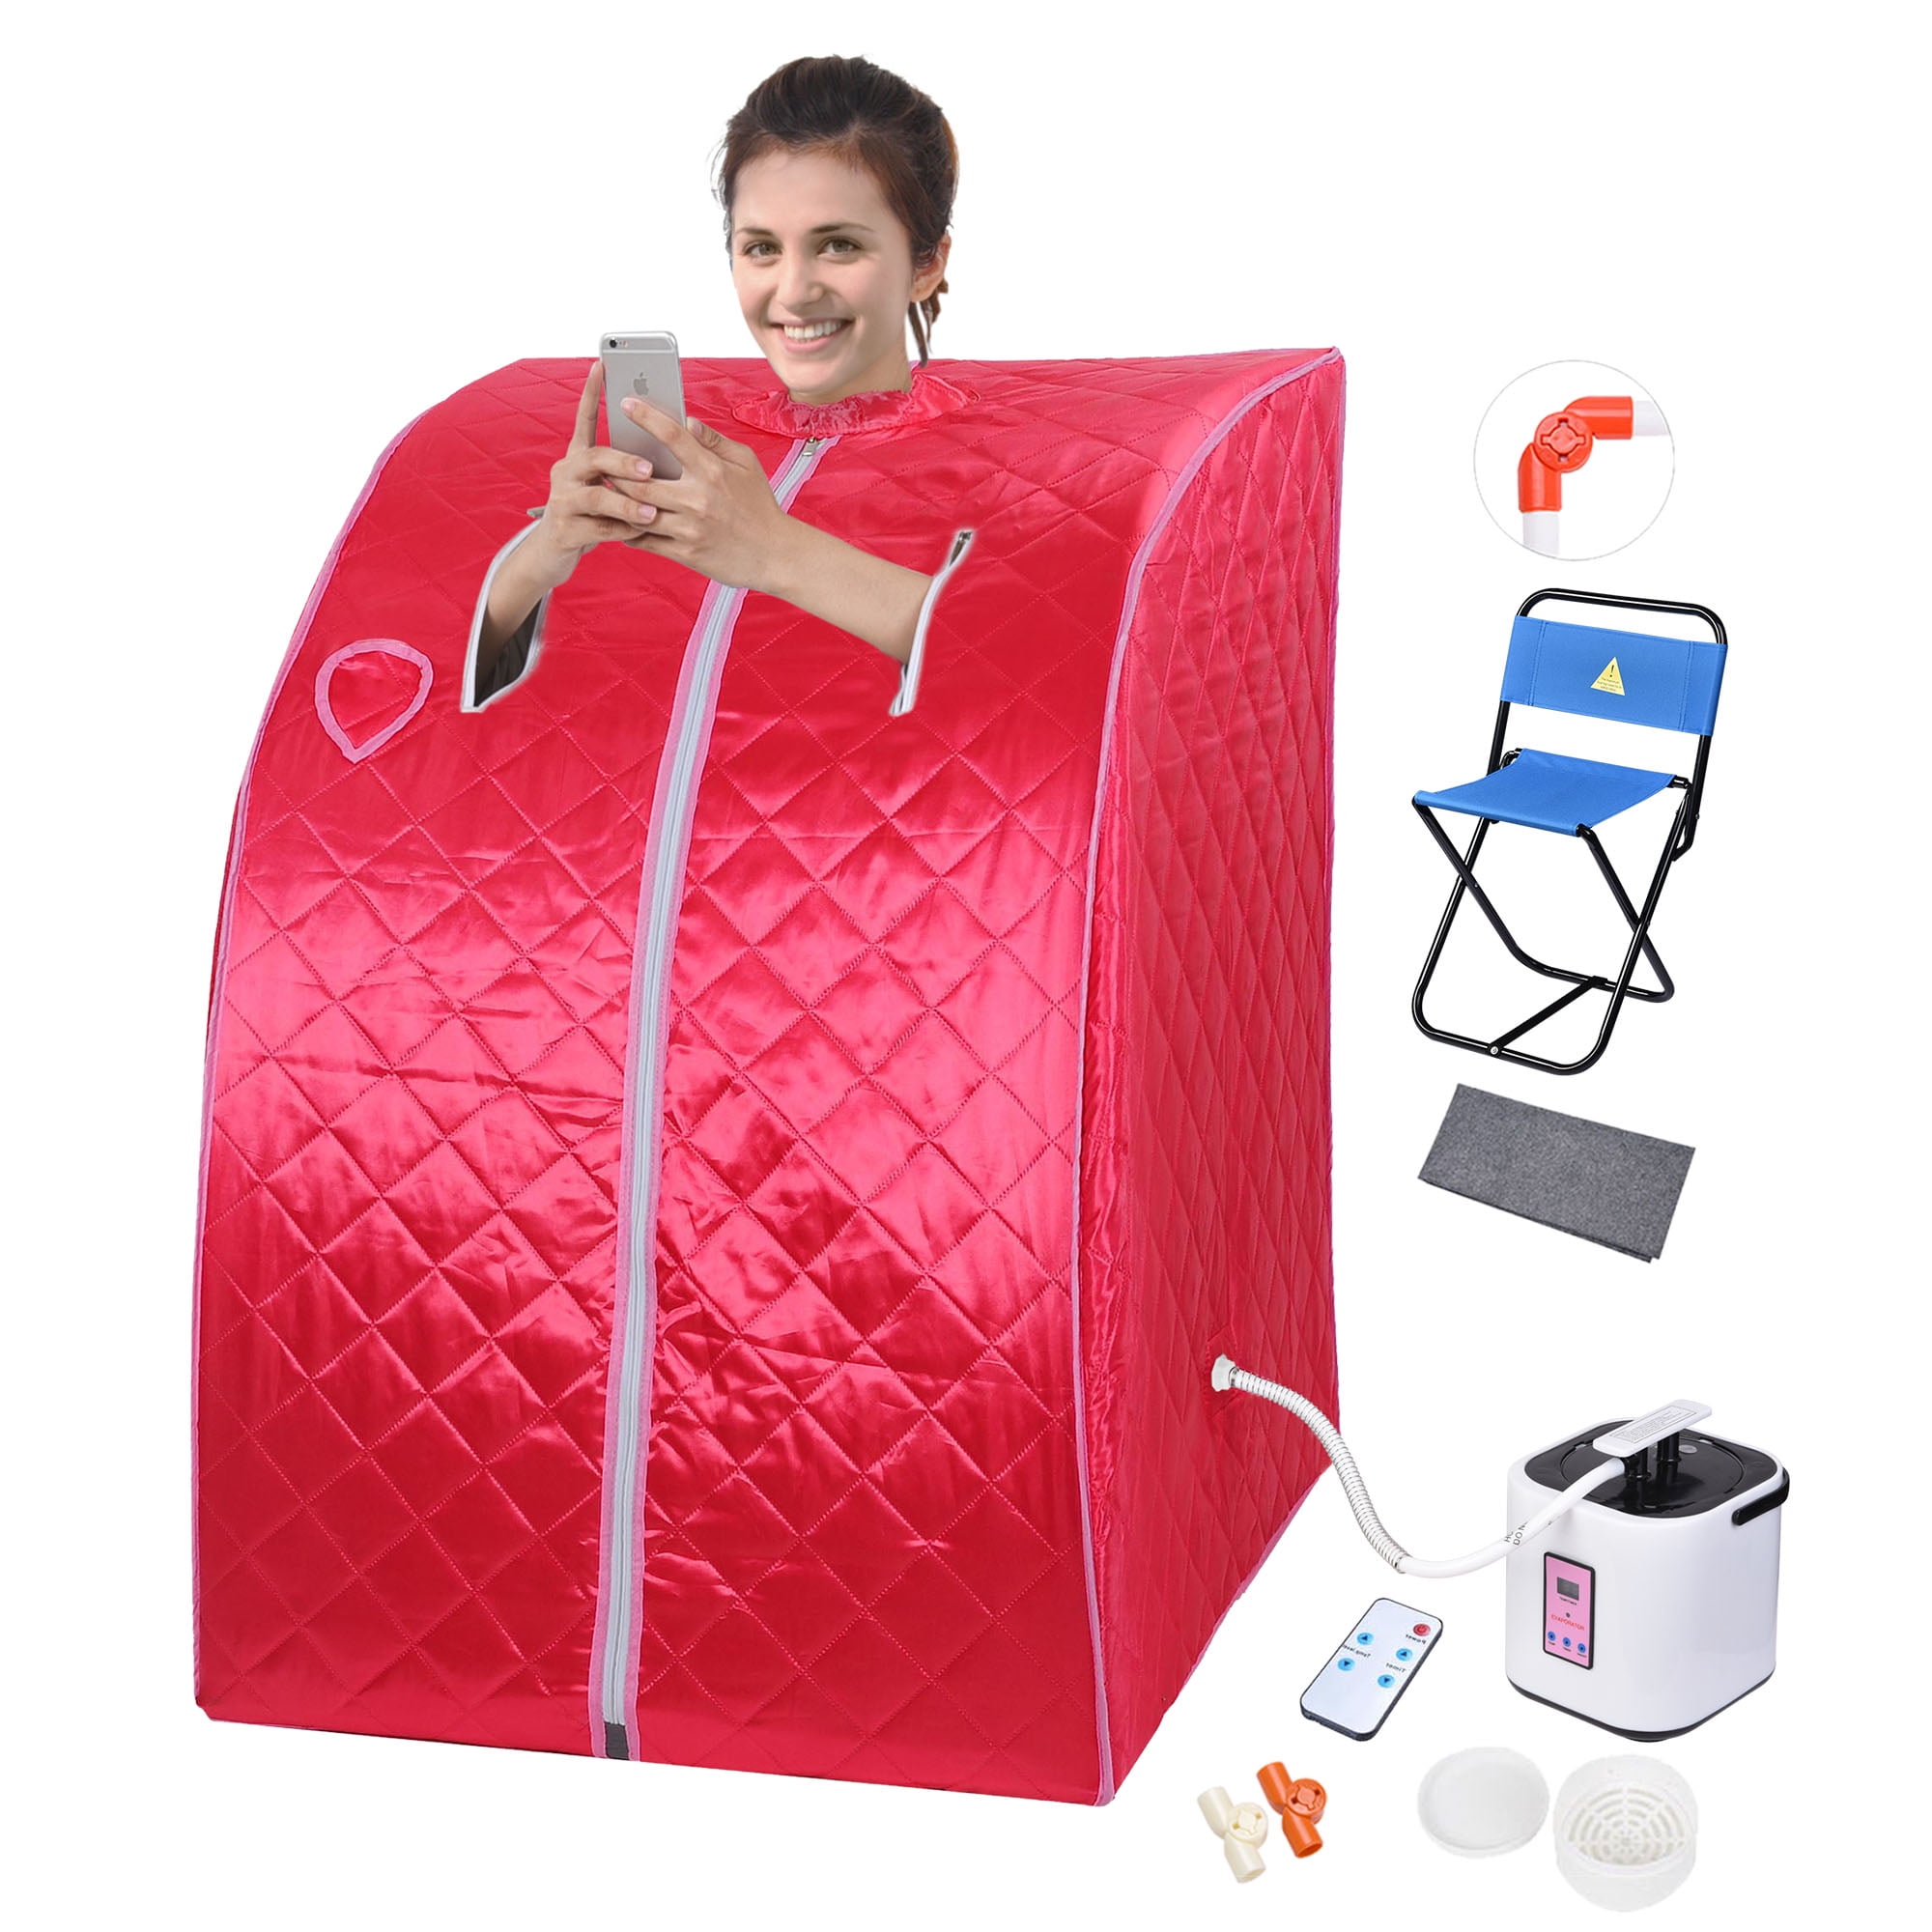 Pink Folding Canvas Chair Hicient Steam Sauna Individual Home Spa-Indoor Portable Sauna Set Includes a Foot Pad,Remote Control Precise Timer 